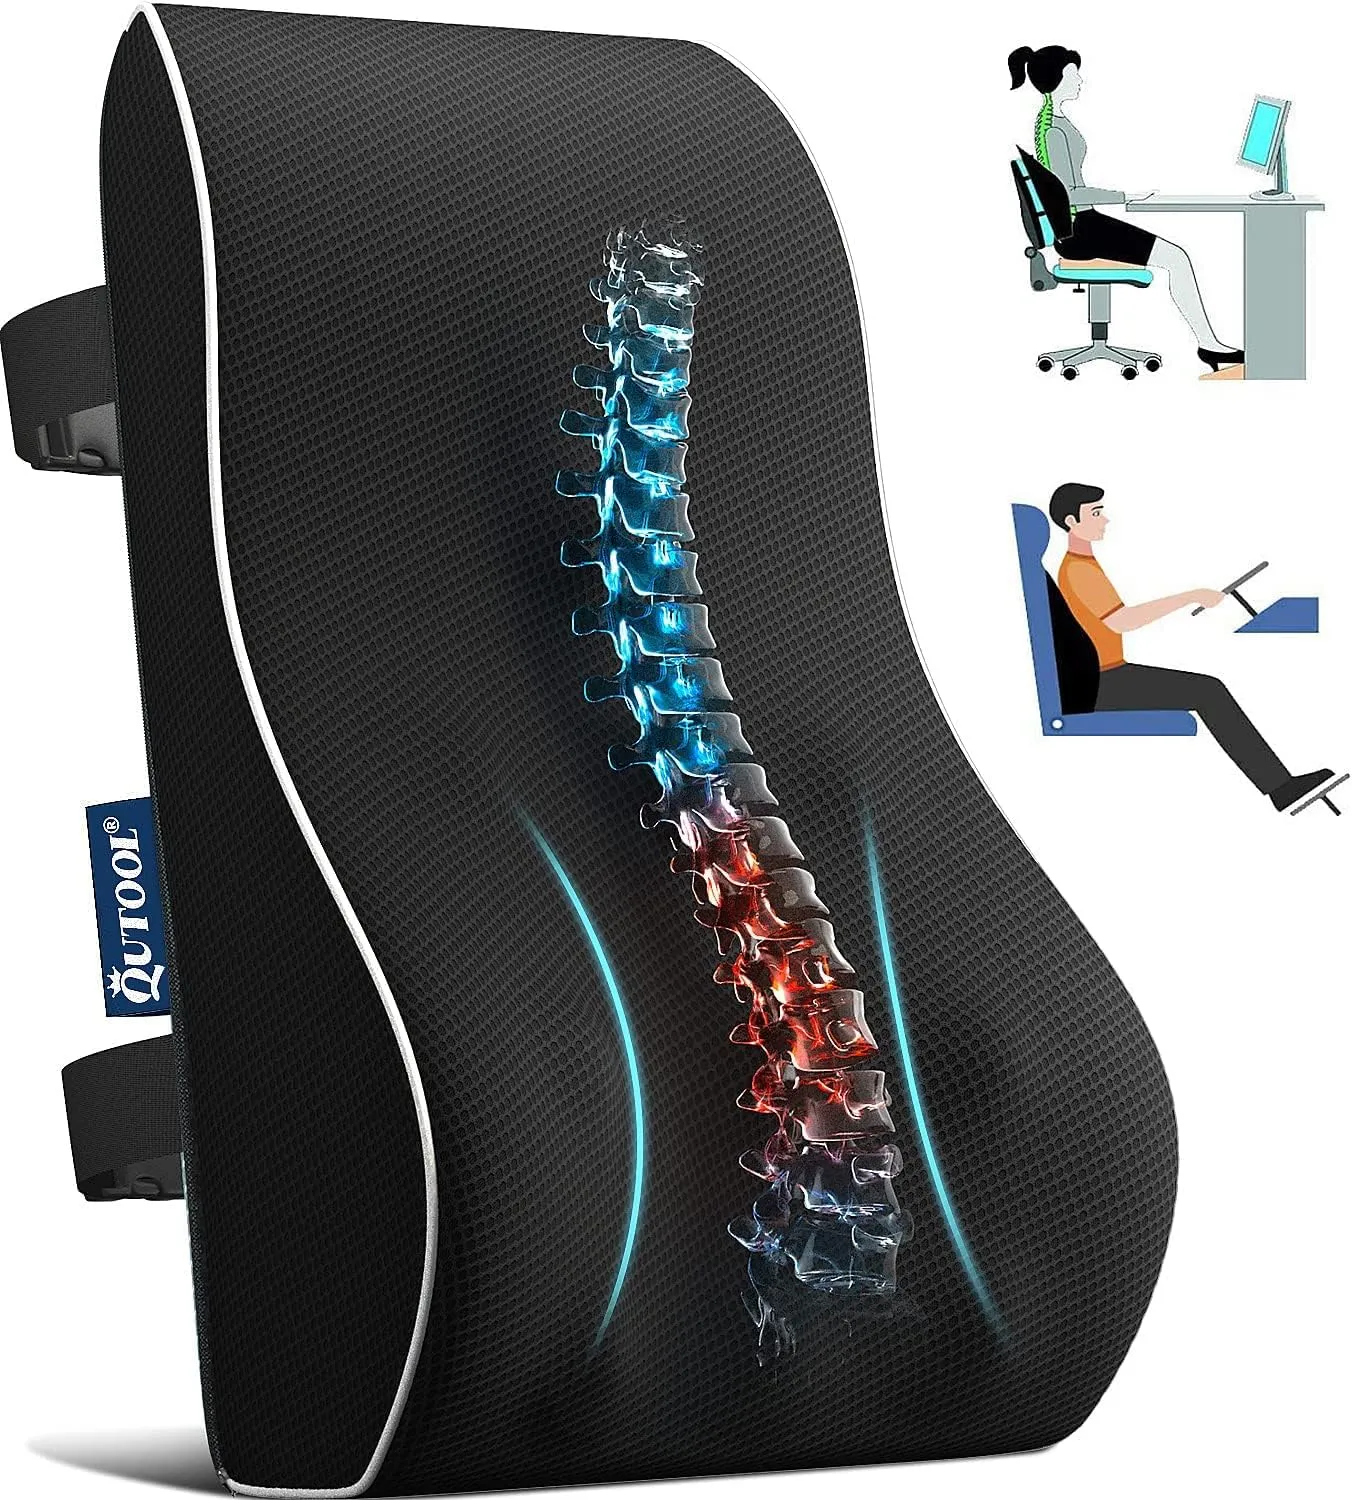 Lumbar Support Pillow for Office Chair Back Support Car, Computer, Gaming Chair, Recliner Memory Foam Back Cushion for Pain Relief Improve Posture